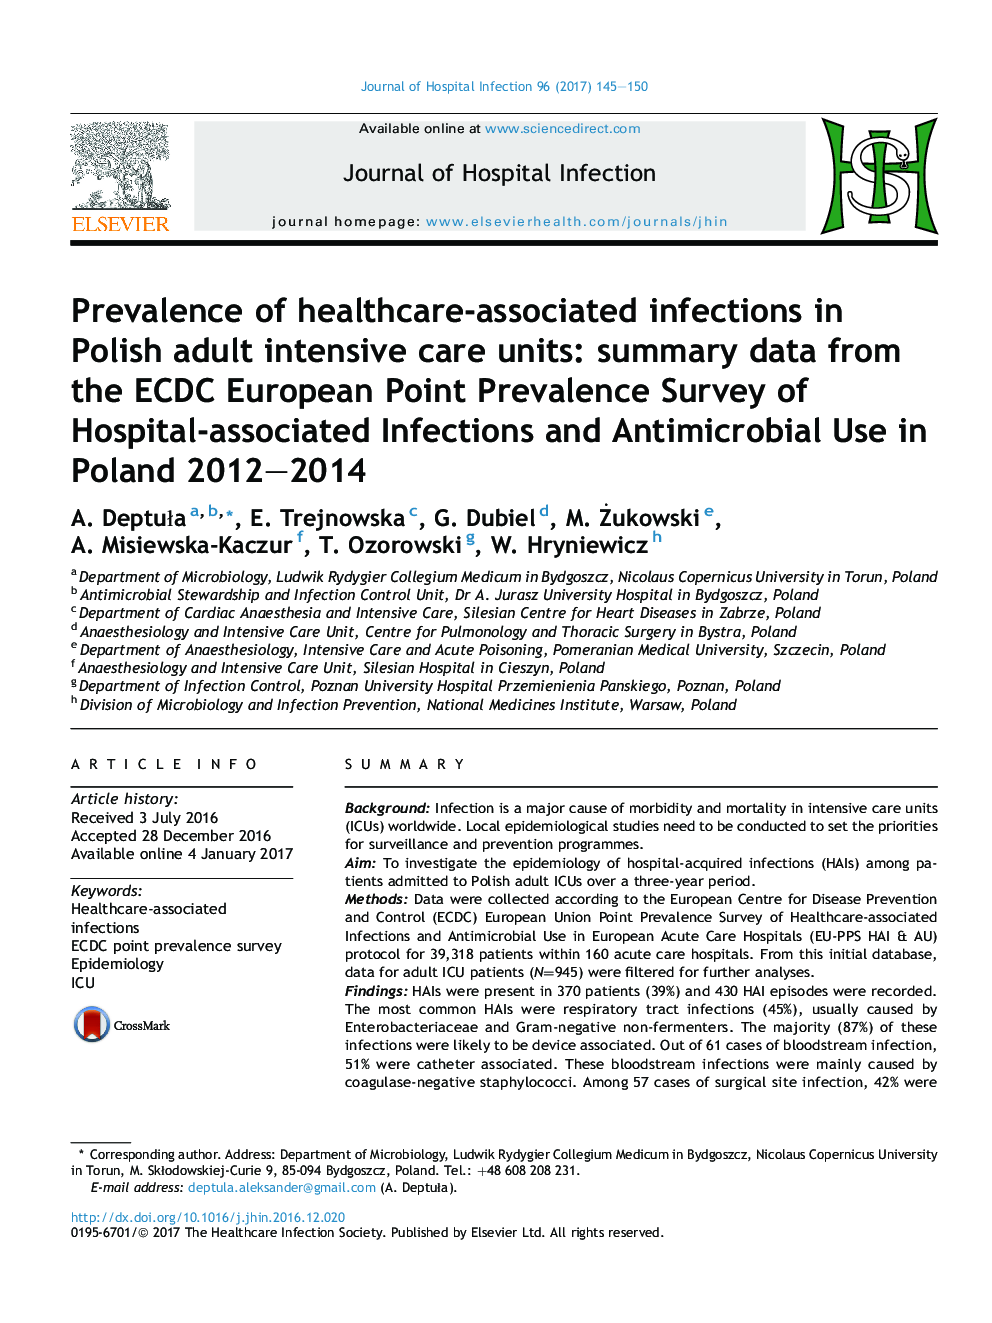 Prevalence of healthcare-associated infections in Polish adult intensive care units: summary data from the ECDC European Point Prevalence Survey of Hospital-associated Infections and Antimicrobial Use in Poland 2012-2014